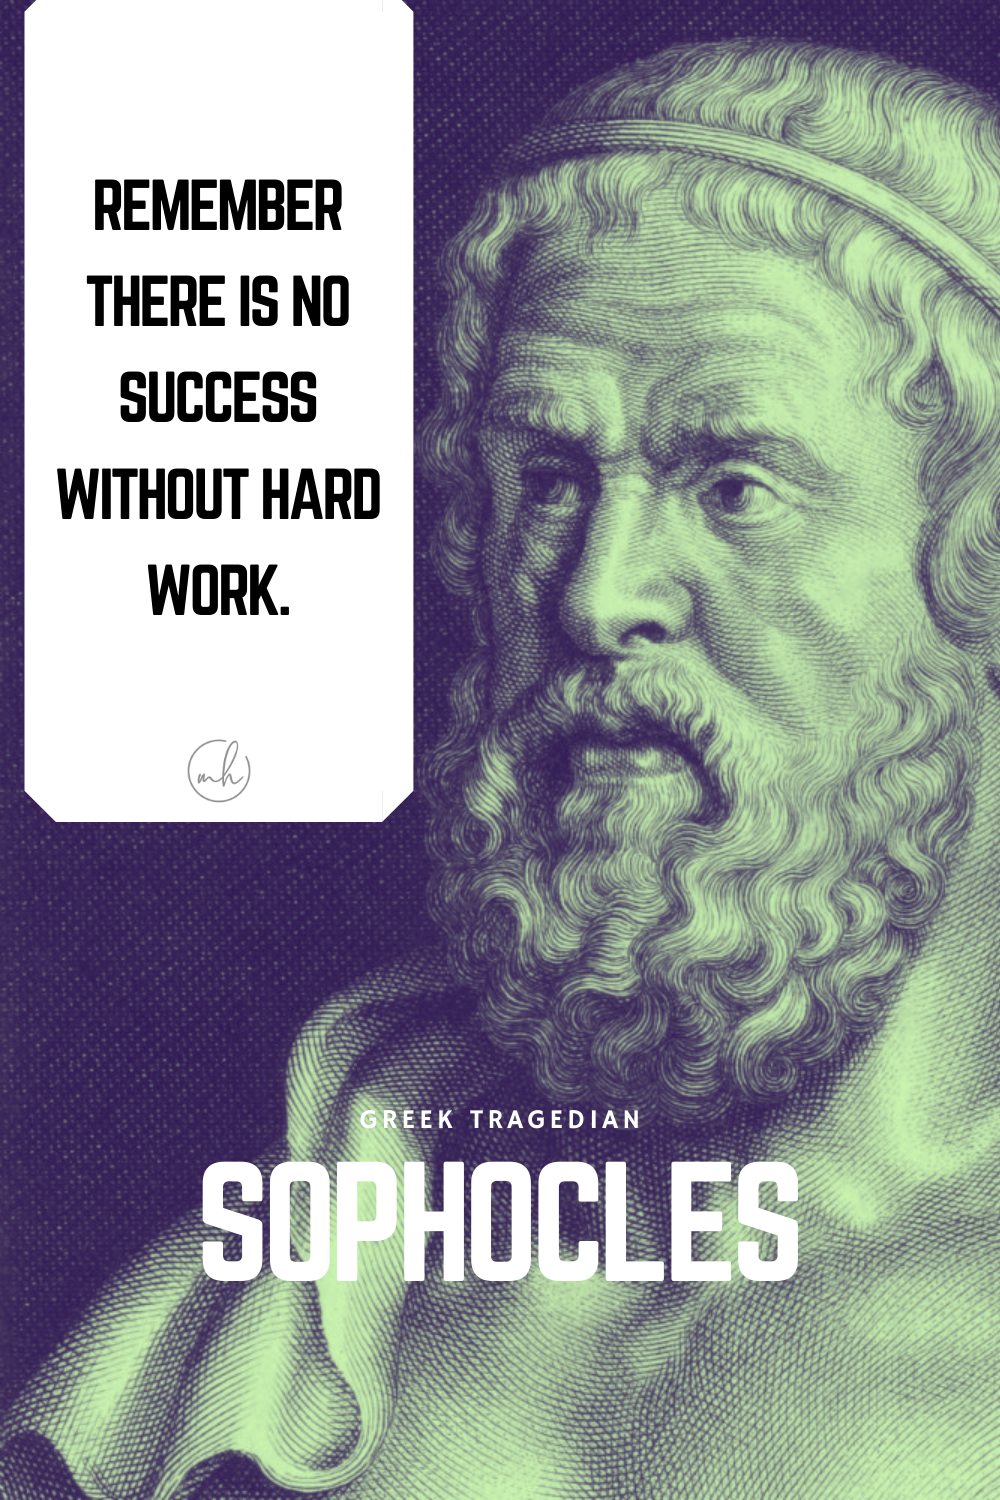 "Remember there is no success without hard work." - Sophocles